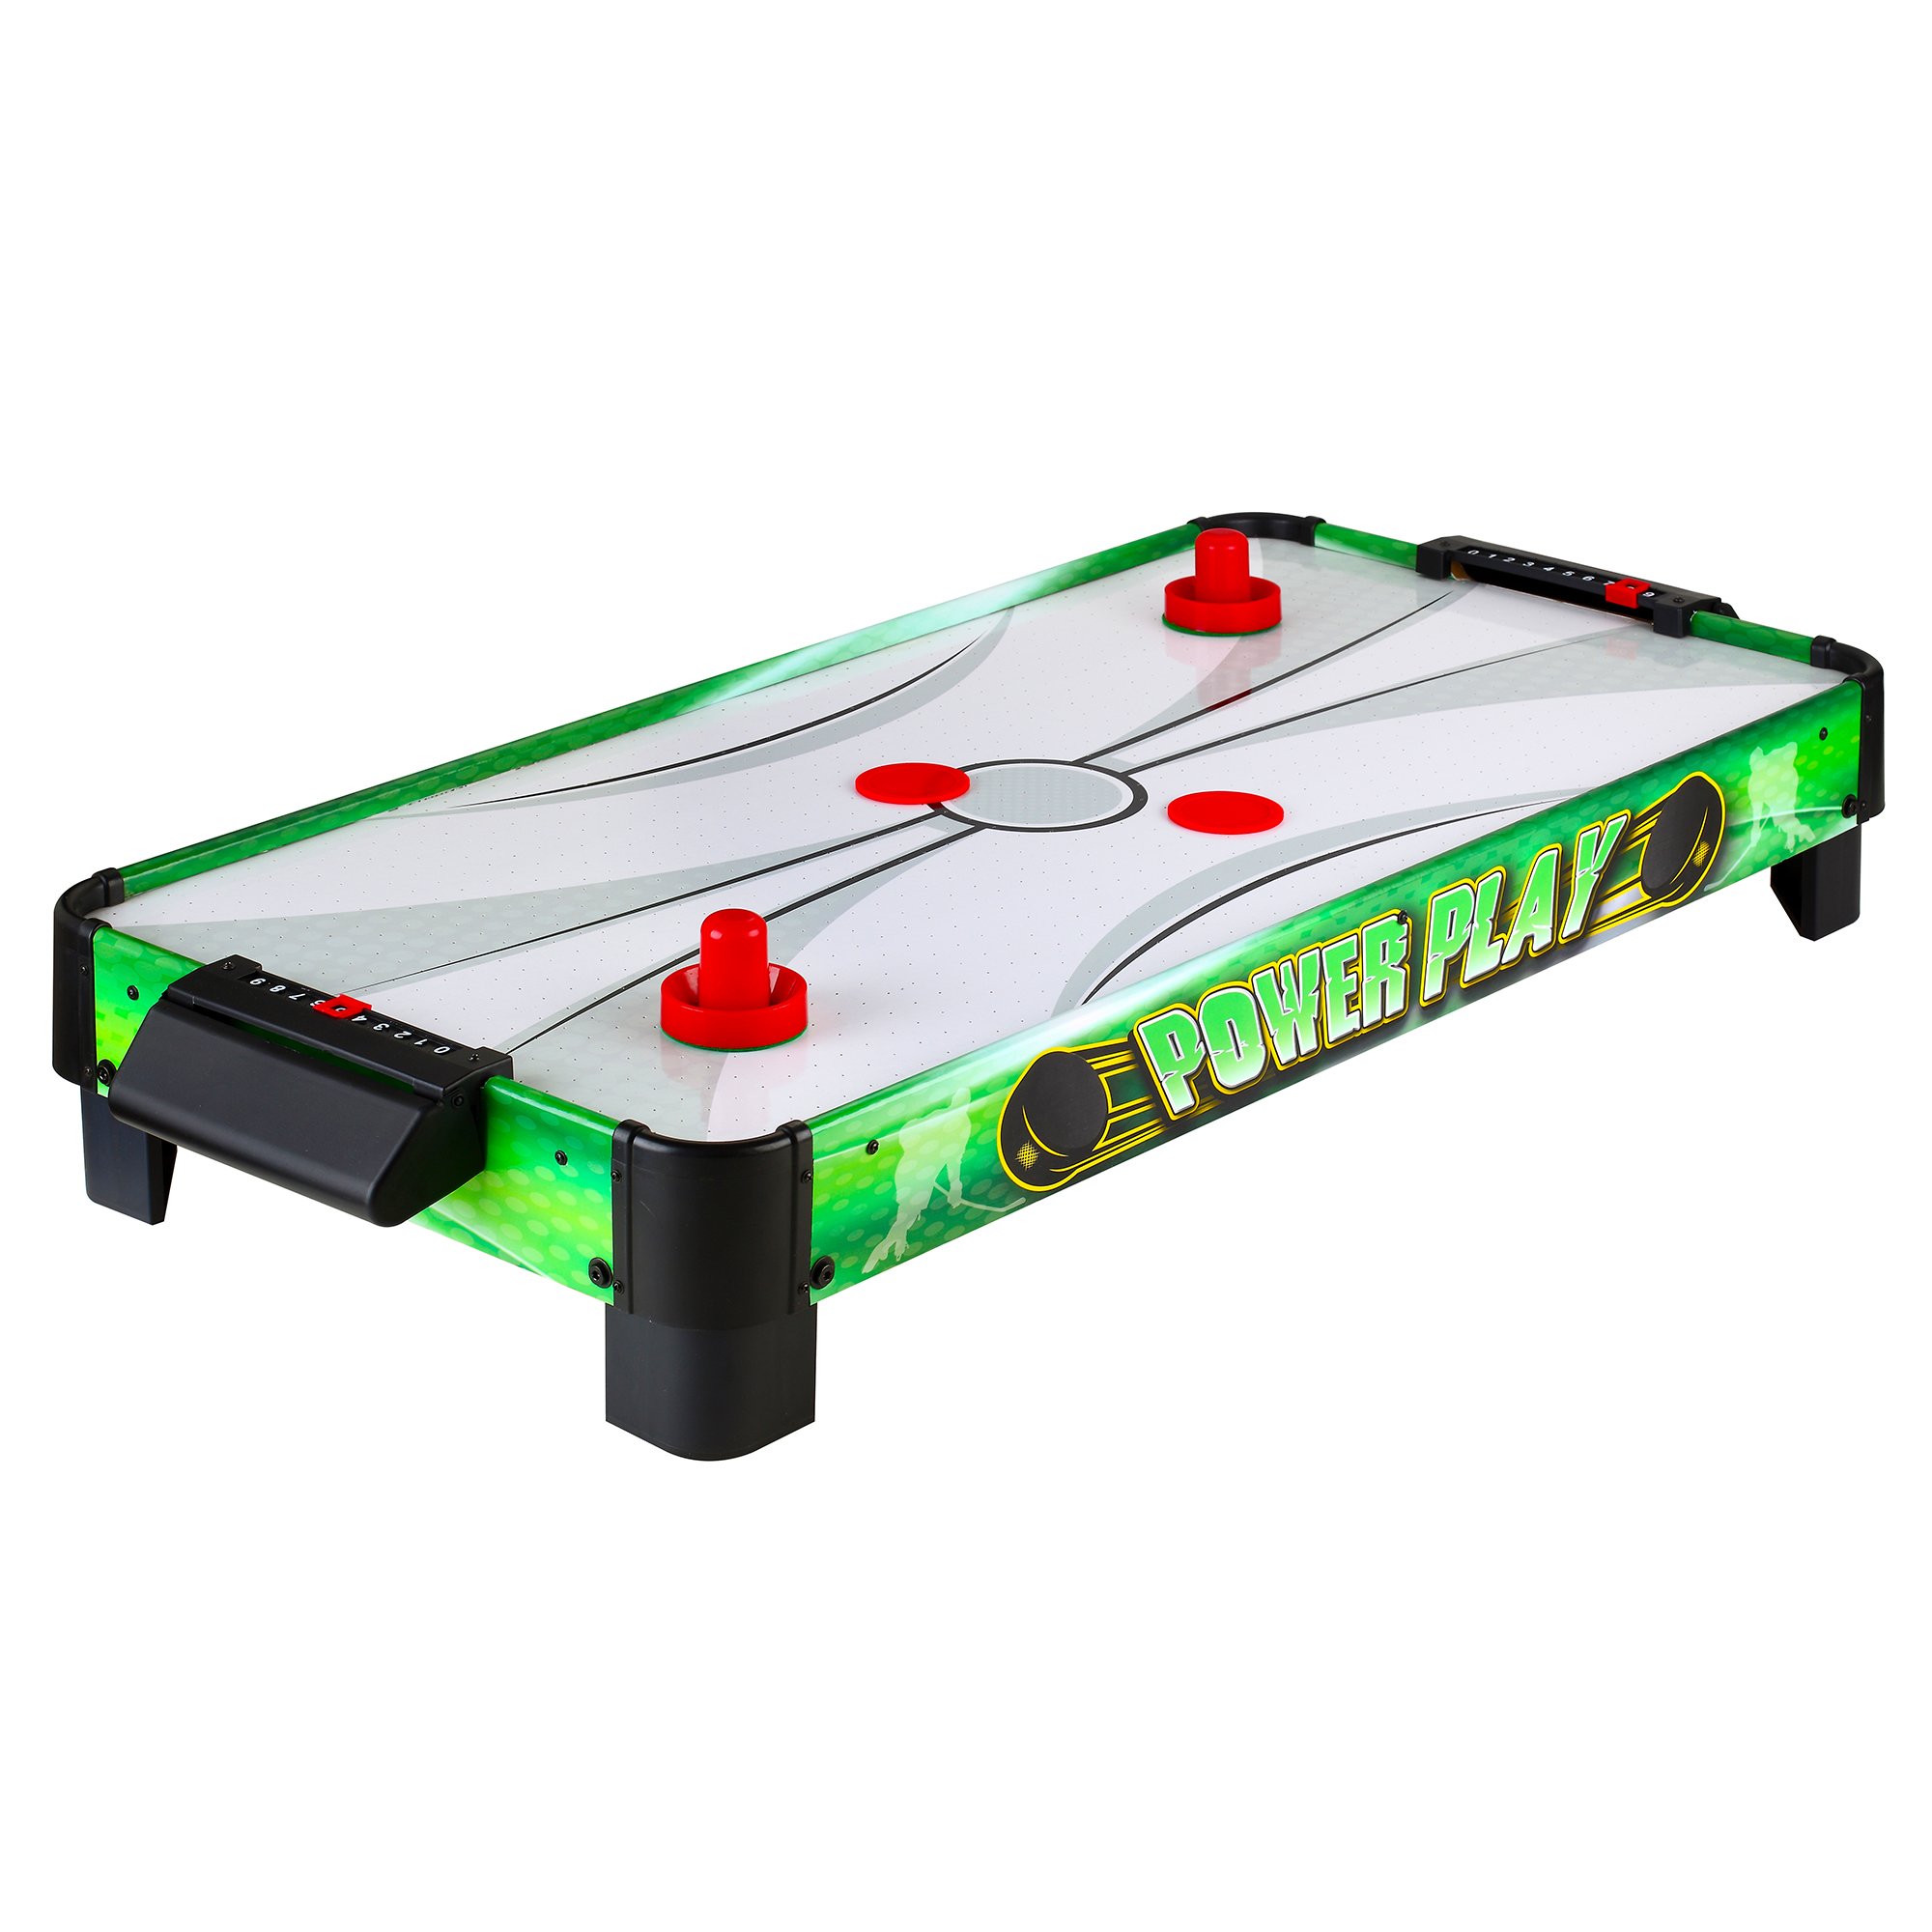 Green and black Hathaway Power Play 40-inch Tabletop Air Hockey Table